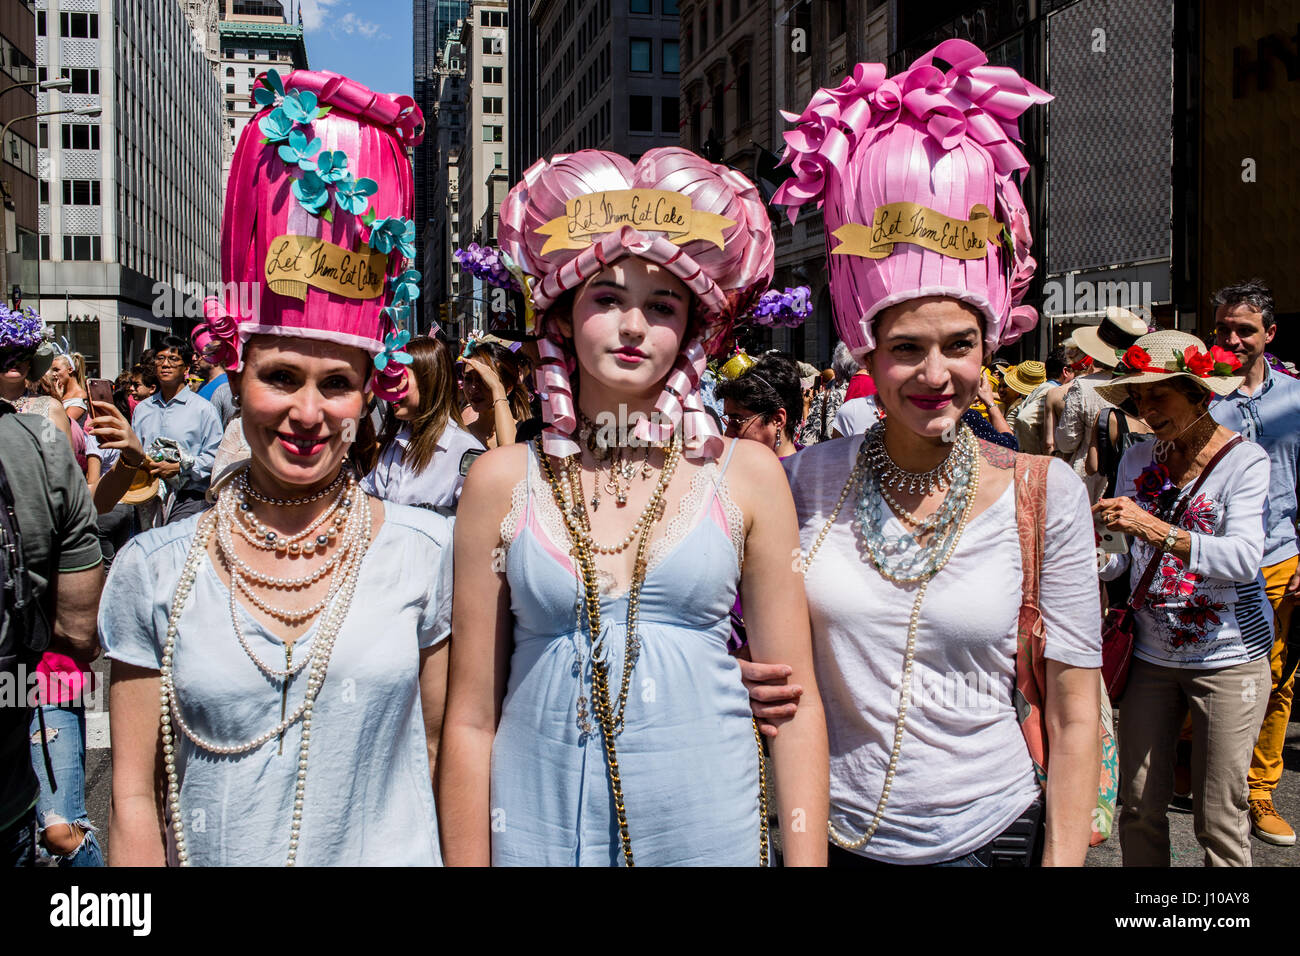 New York, USA. 16th Apr, 2017. Three women in Marie Antoinette-style headwear, all bearing the label 'Let them eat cake.' at New York's annual Easter Bonnet Parade and Festival on Fifth Avenue. Credit: Ed Lefkowicz/Alamy Live News Stock Photo